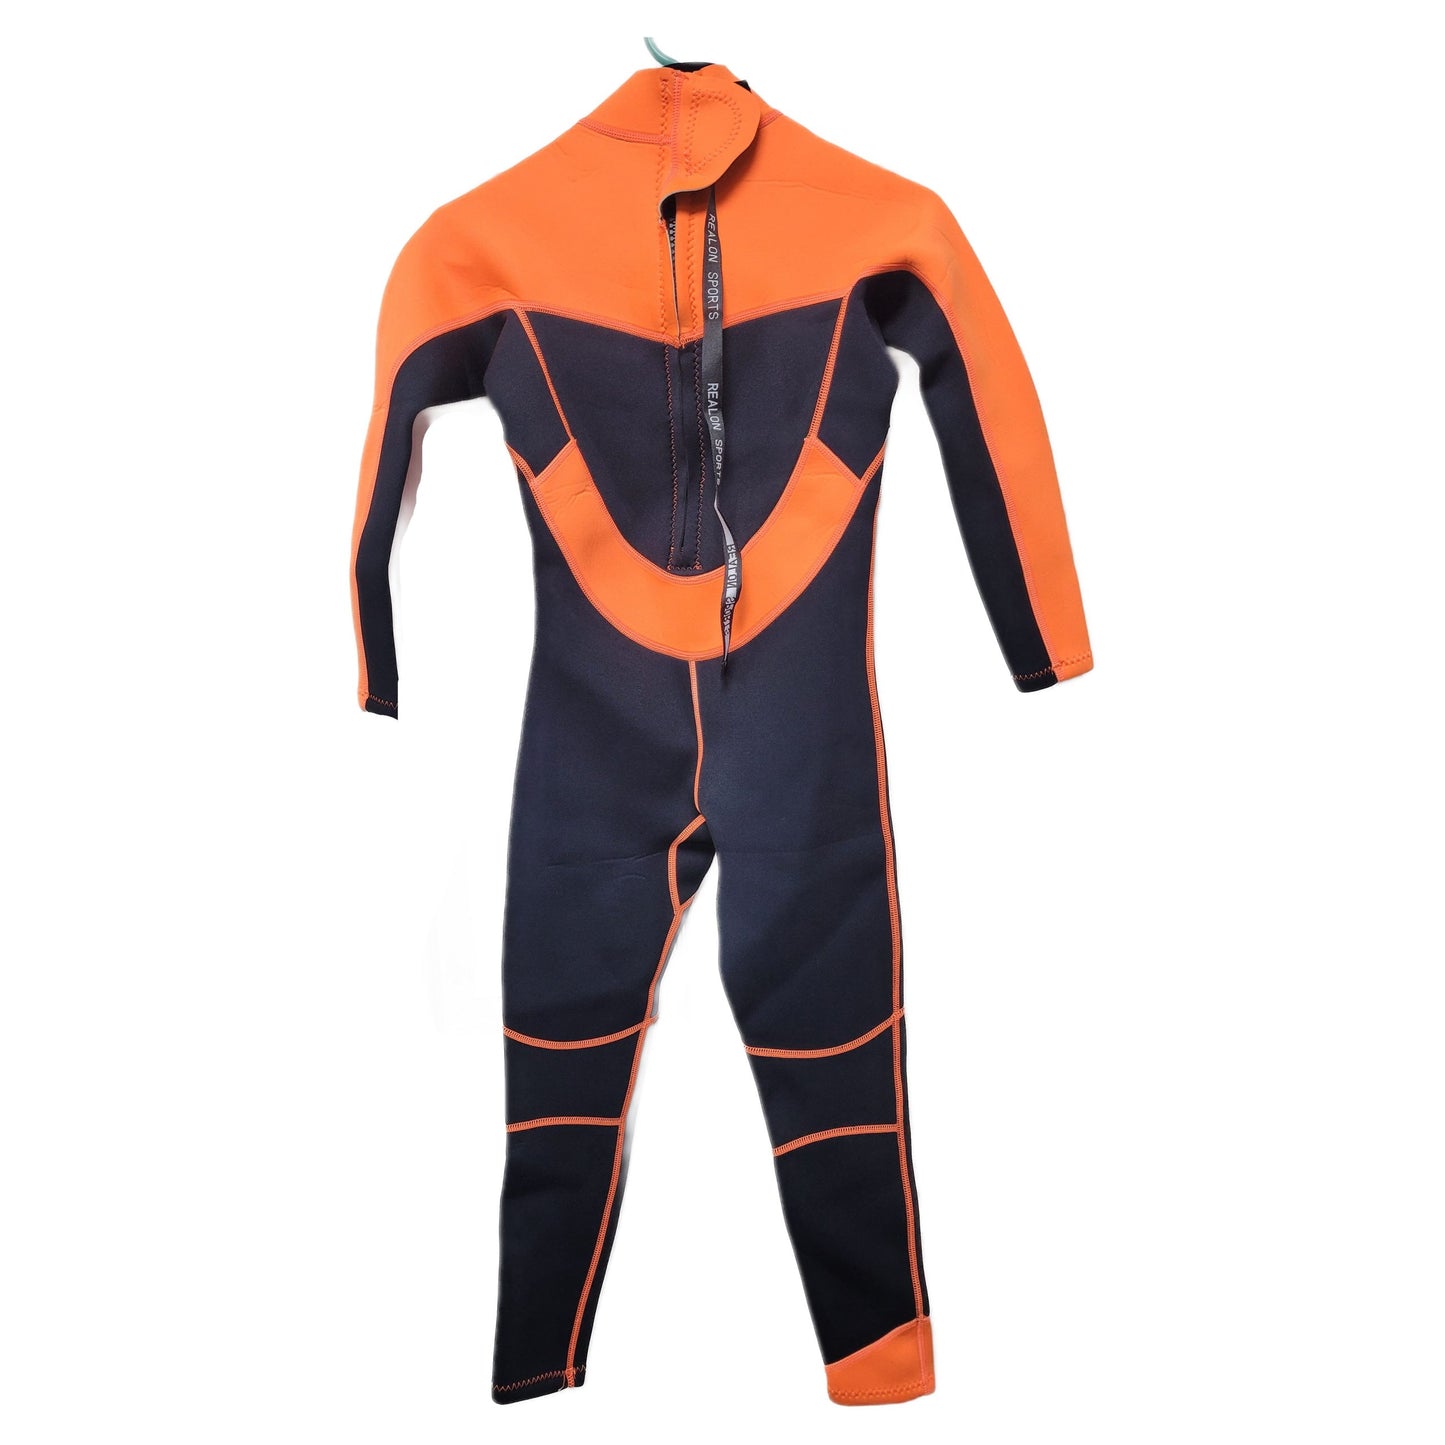 Realon Sports 2mm Youth Wetsuit "L"